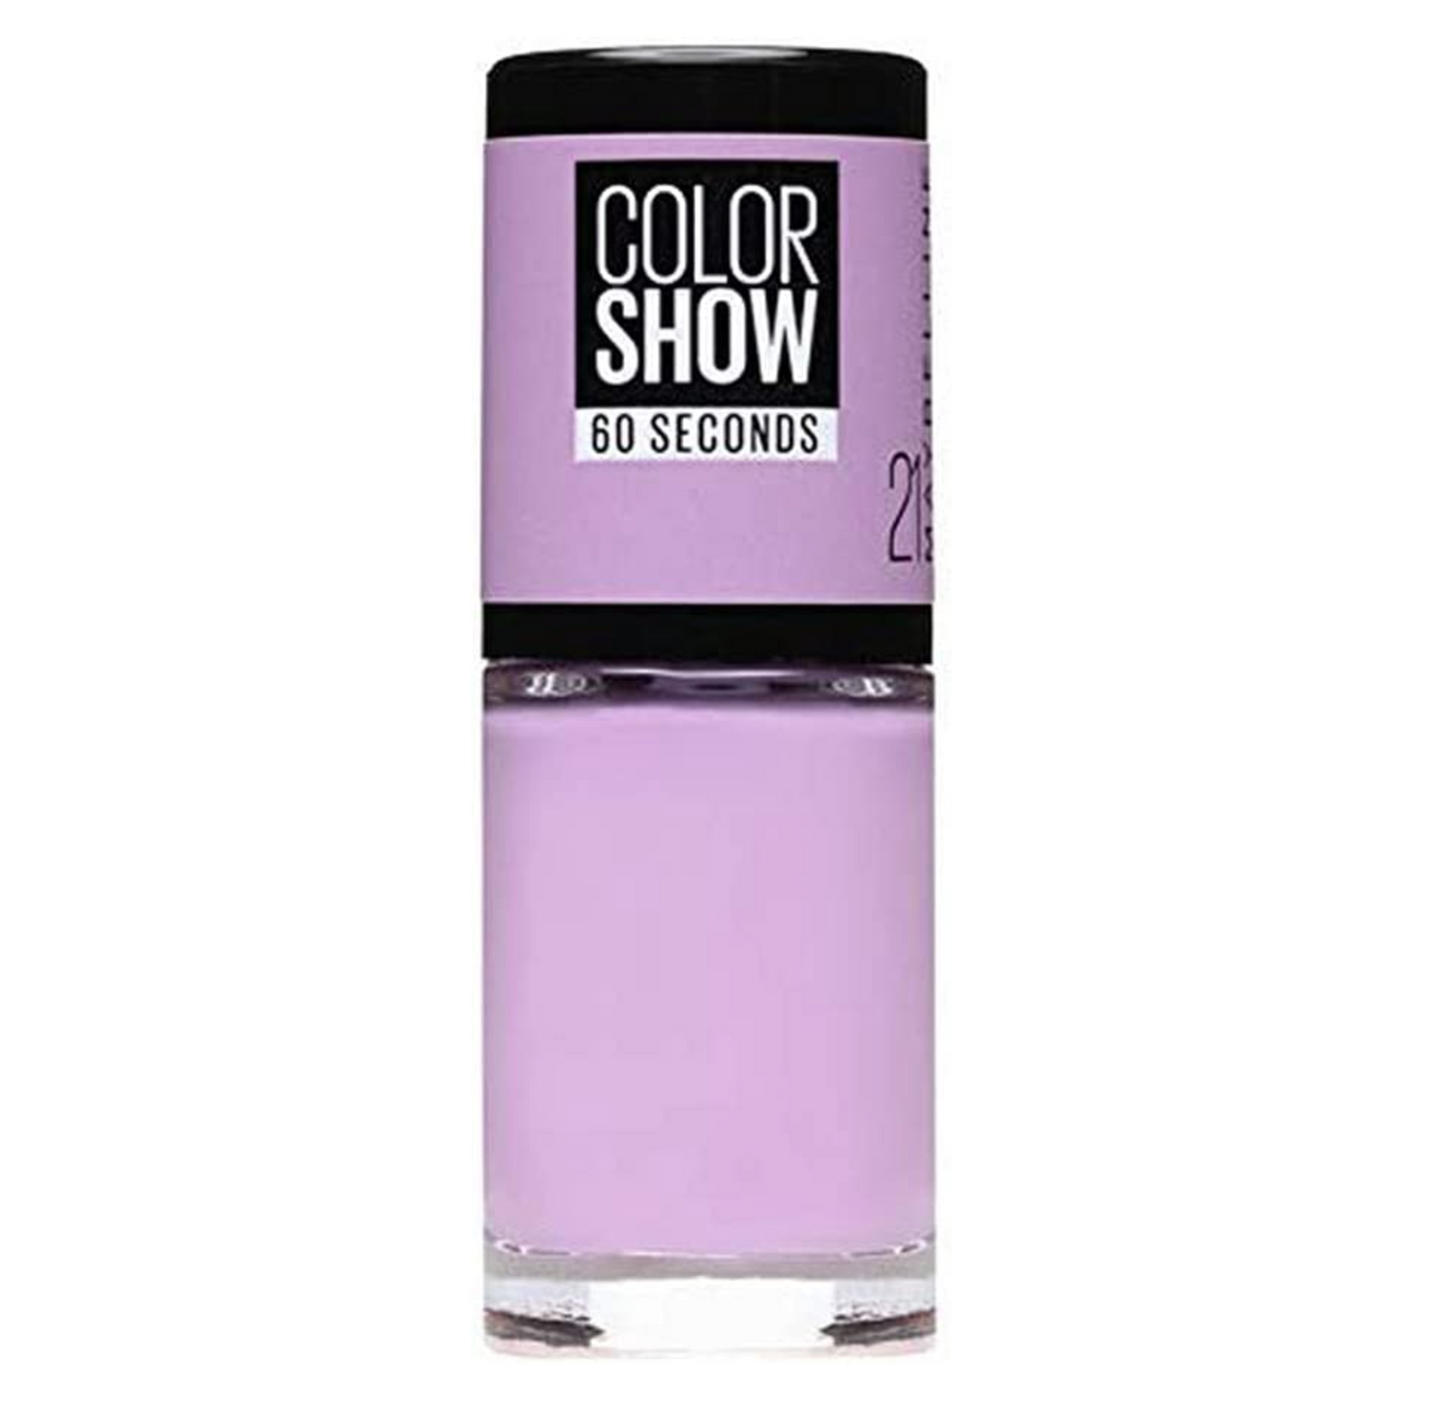 Maybelline Color Show Nail Polish - 21 Lilac Wine